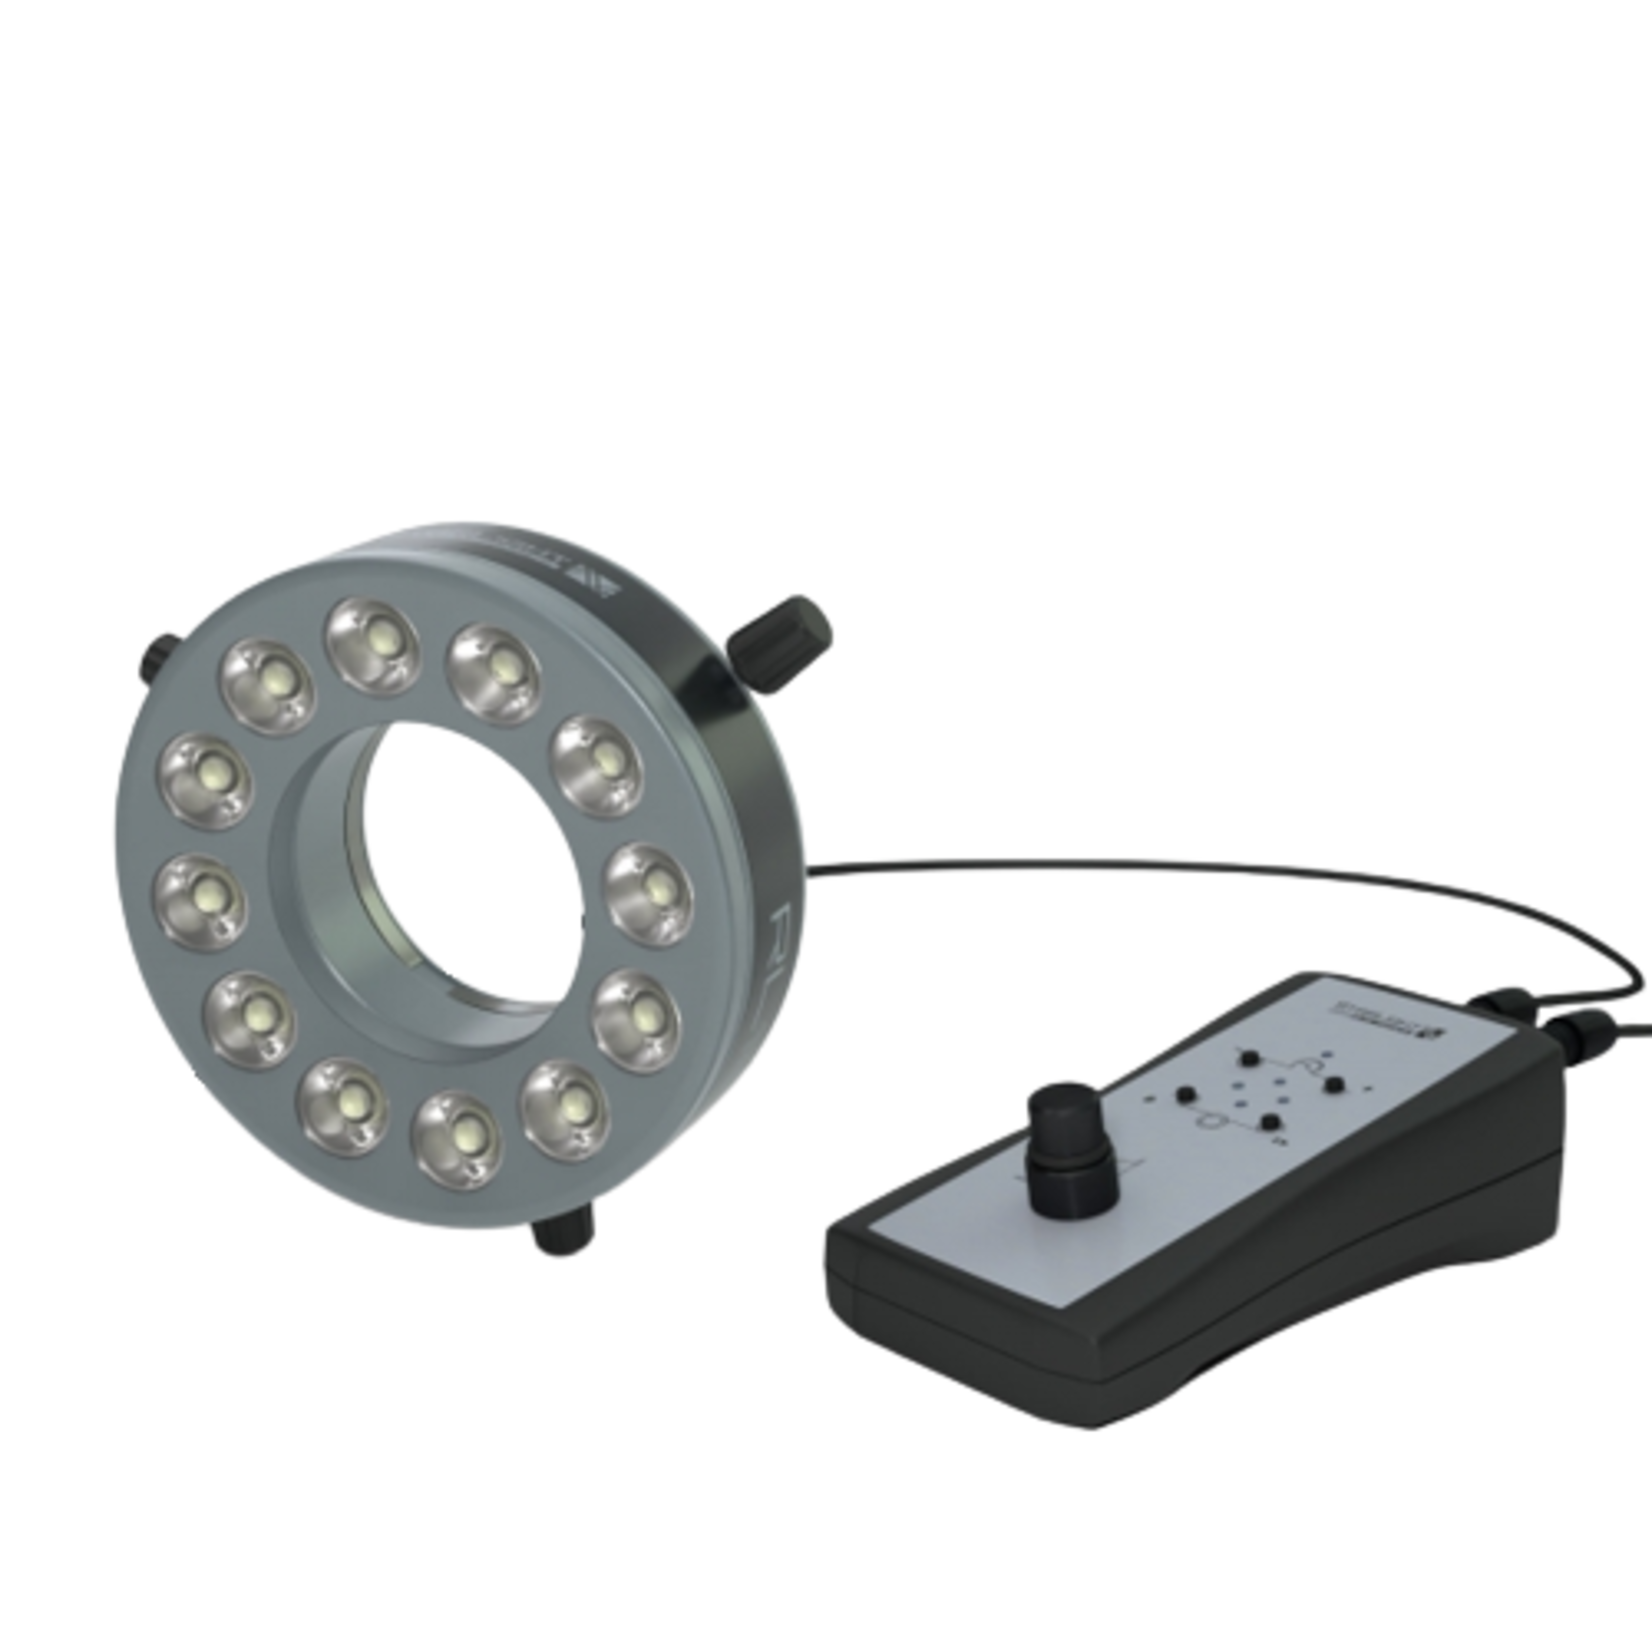 High-brightness segment ring light for working distance 150 mm - 500 mm - optimal approx. 270 mm